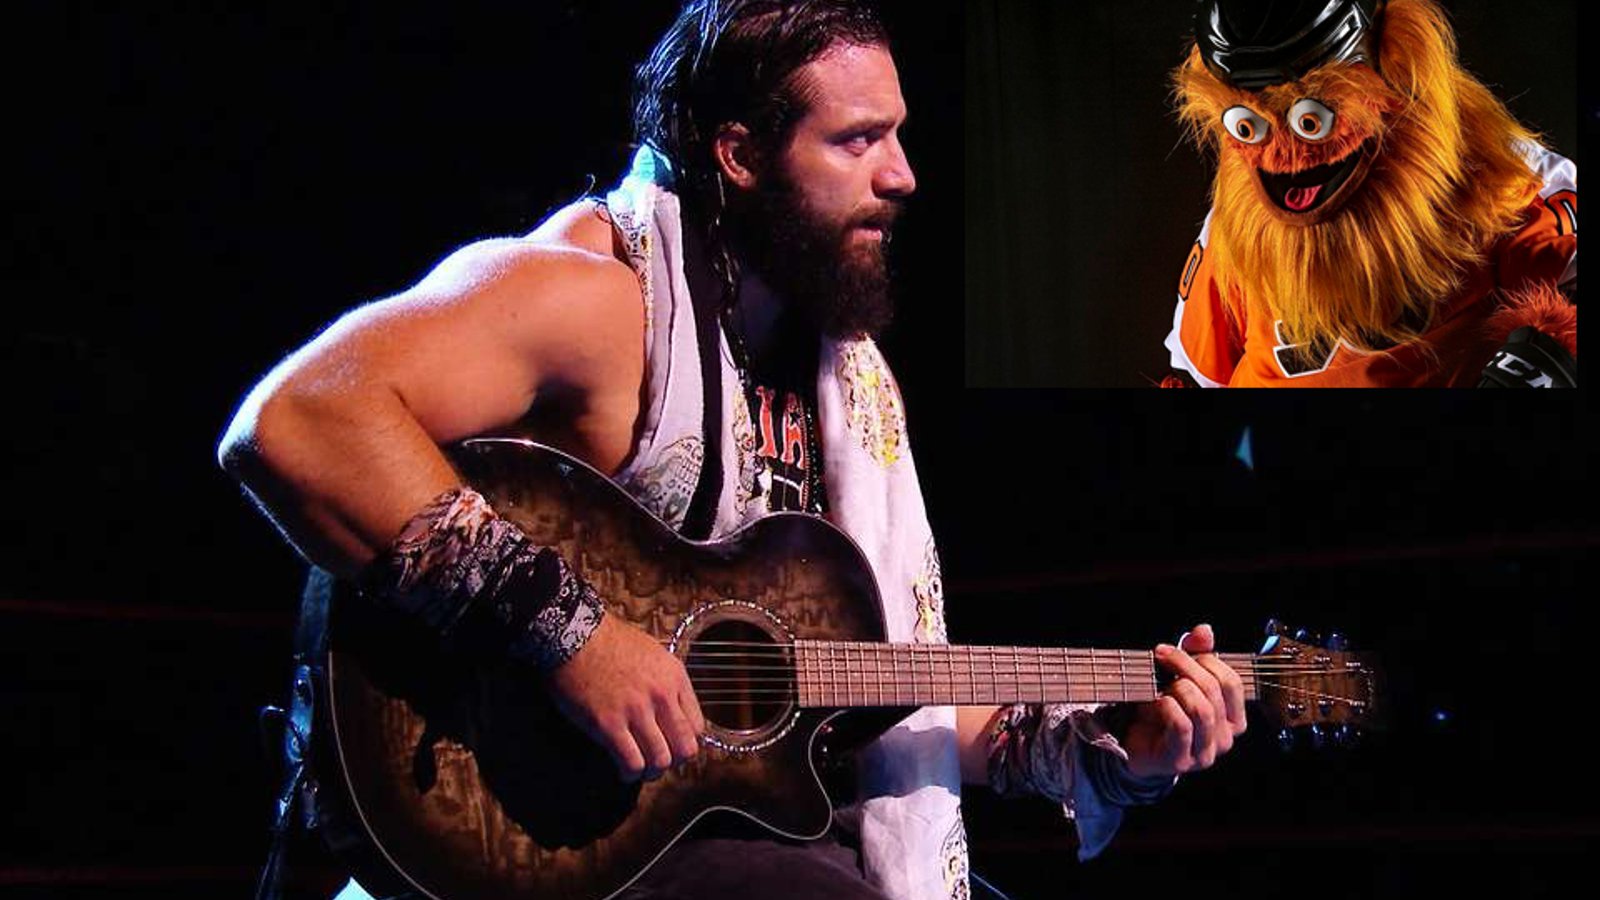 WWE superstar Elias rips Gritty and Philly fans live on Raw!